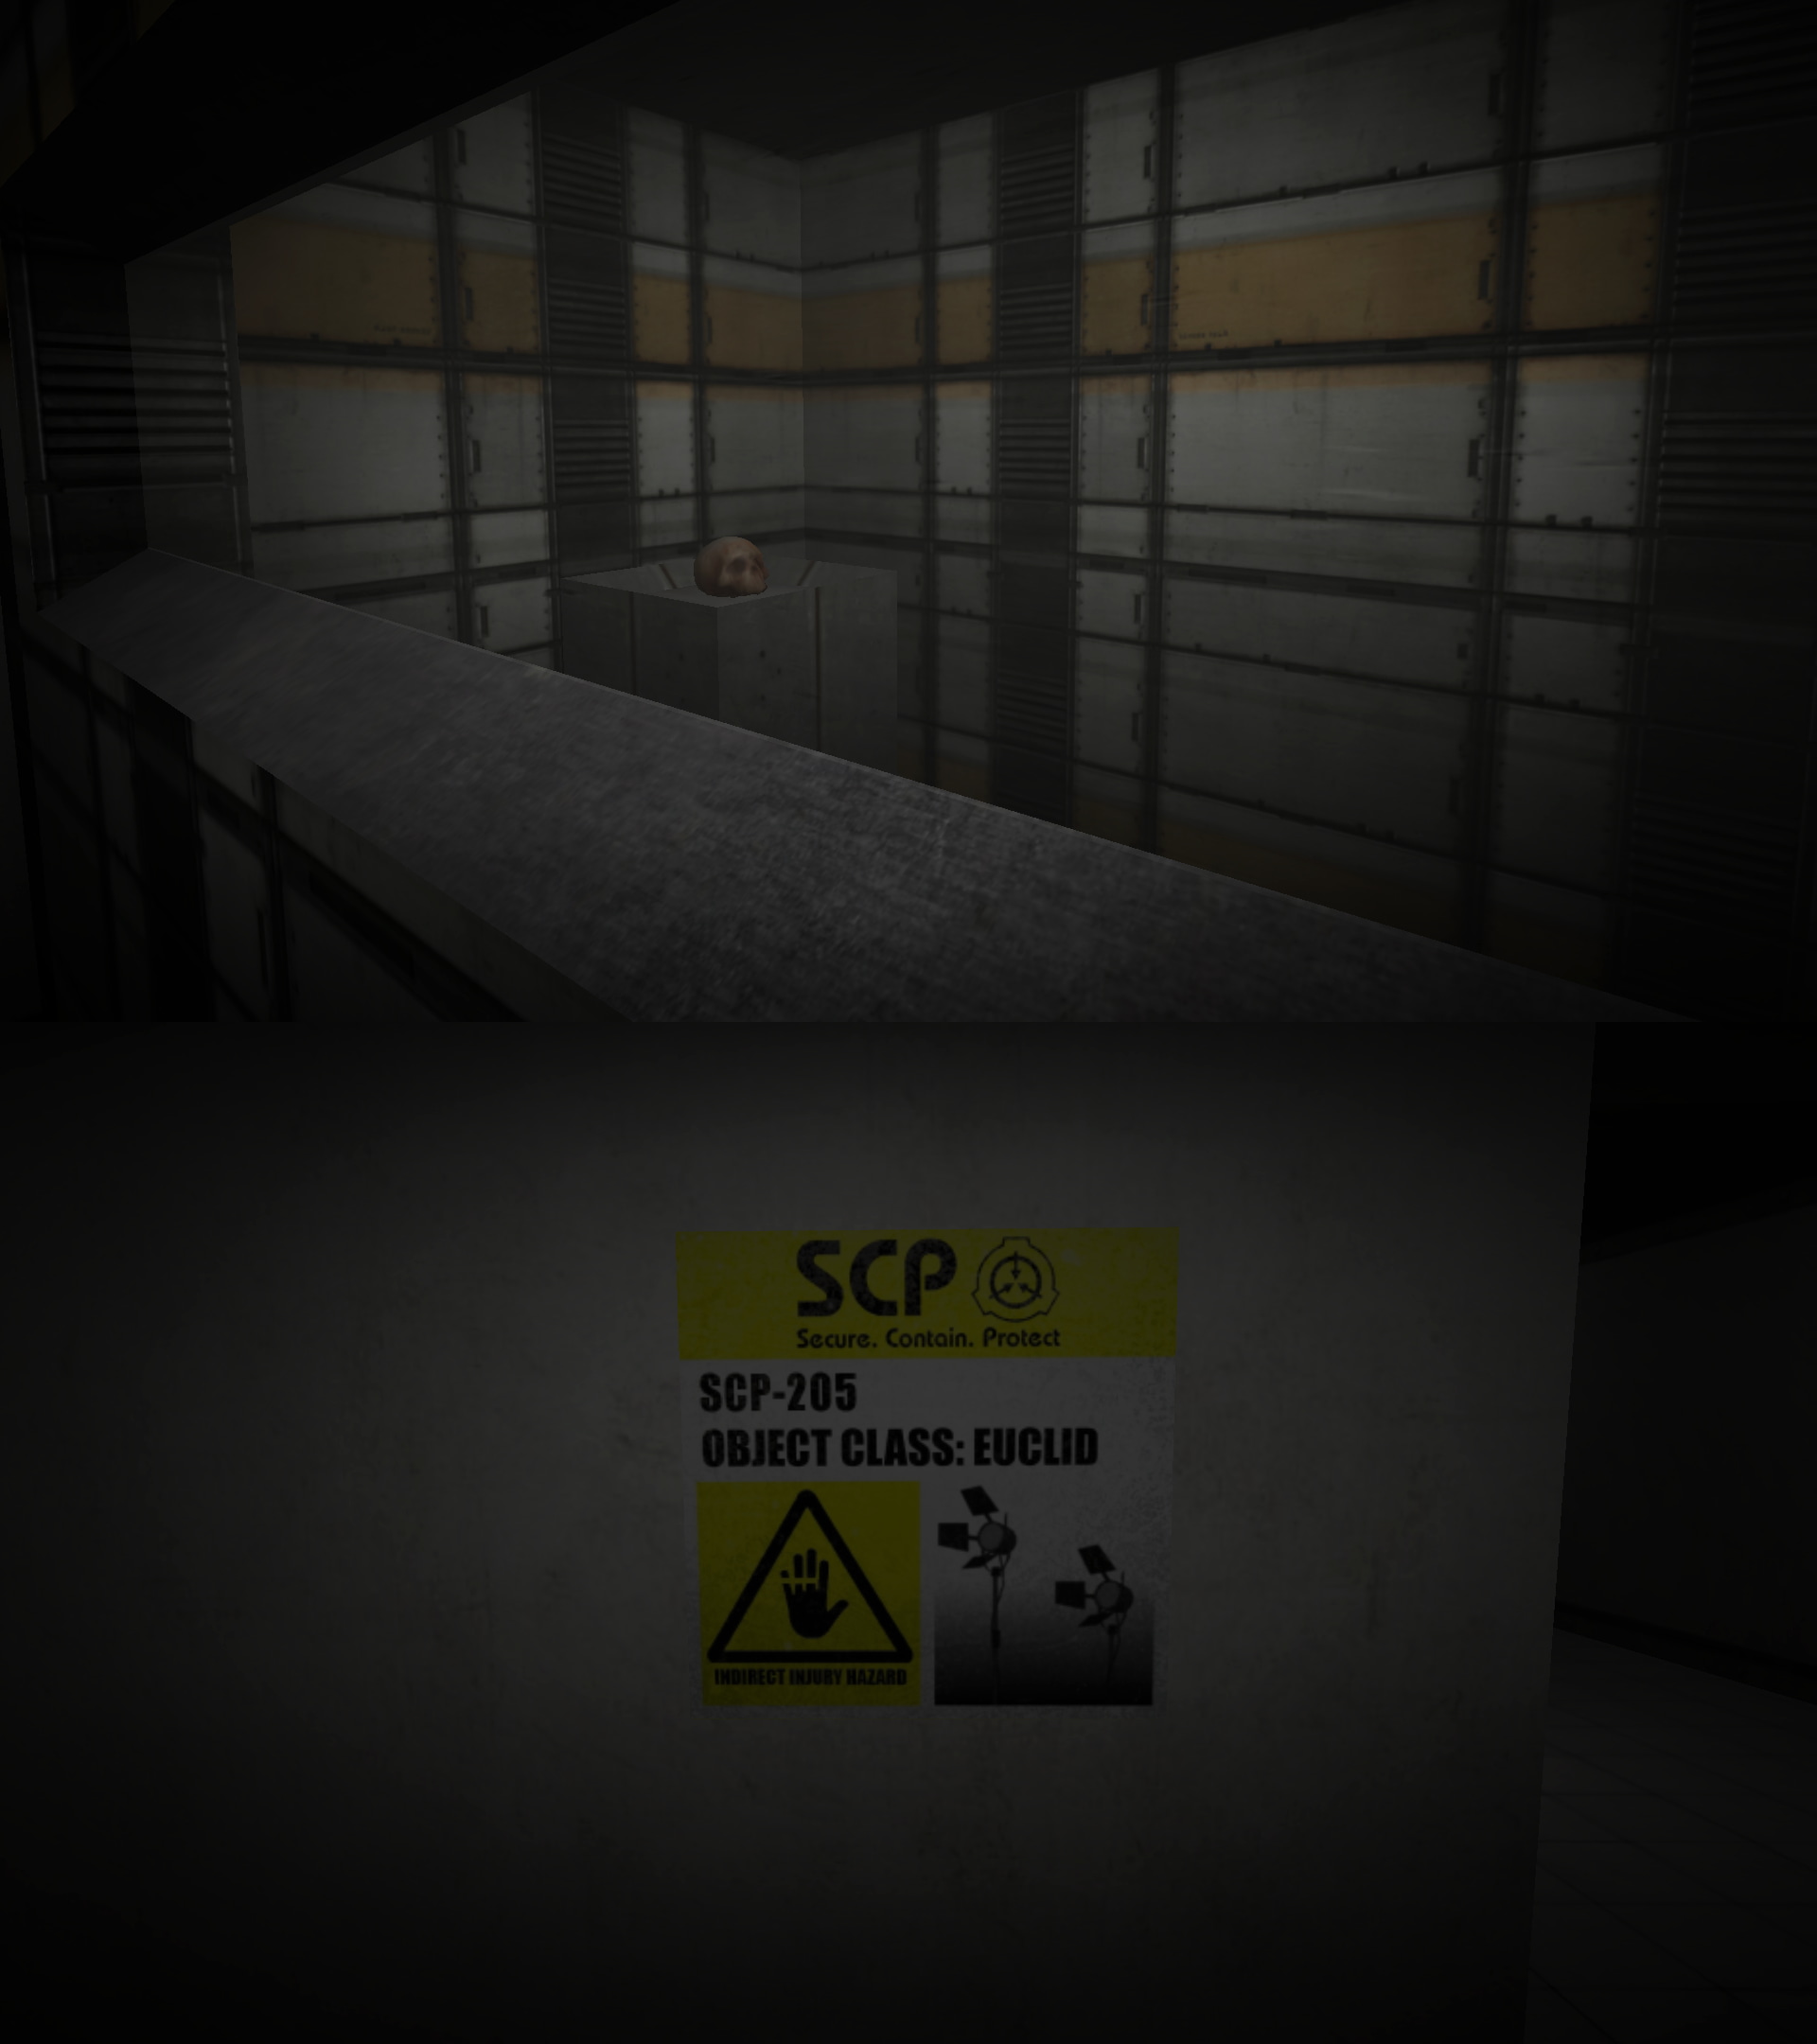 What This Mod's Done feature - SCP - Containment Breach Gameplay